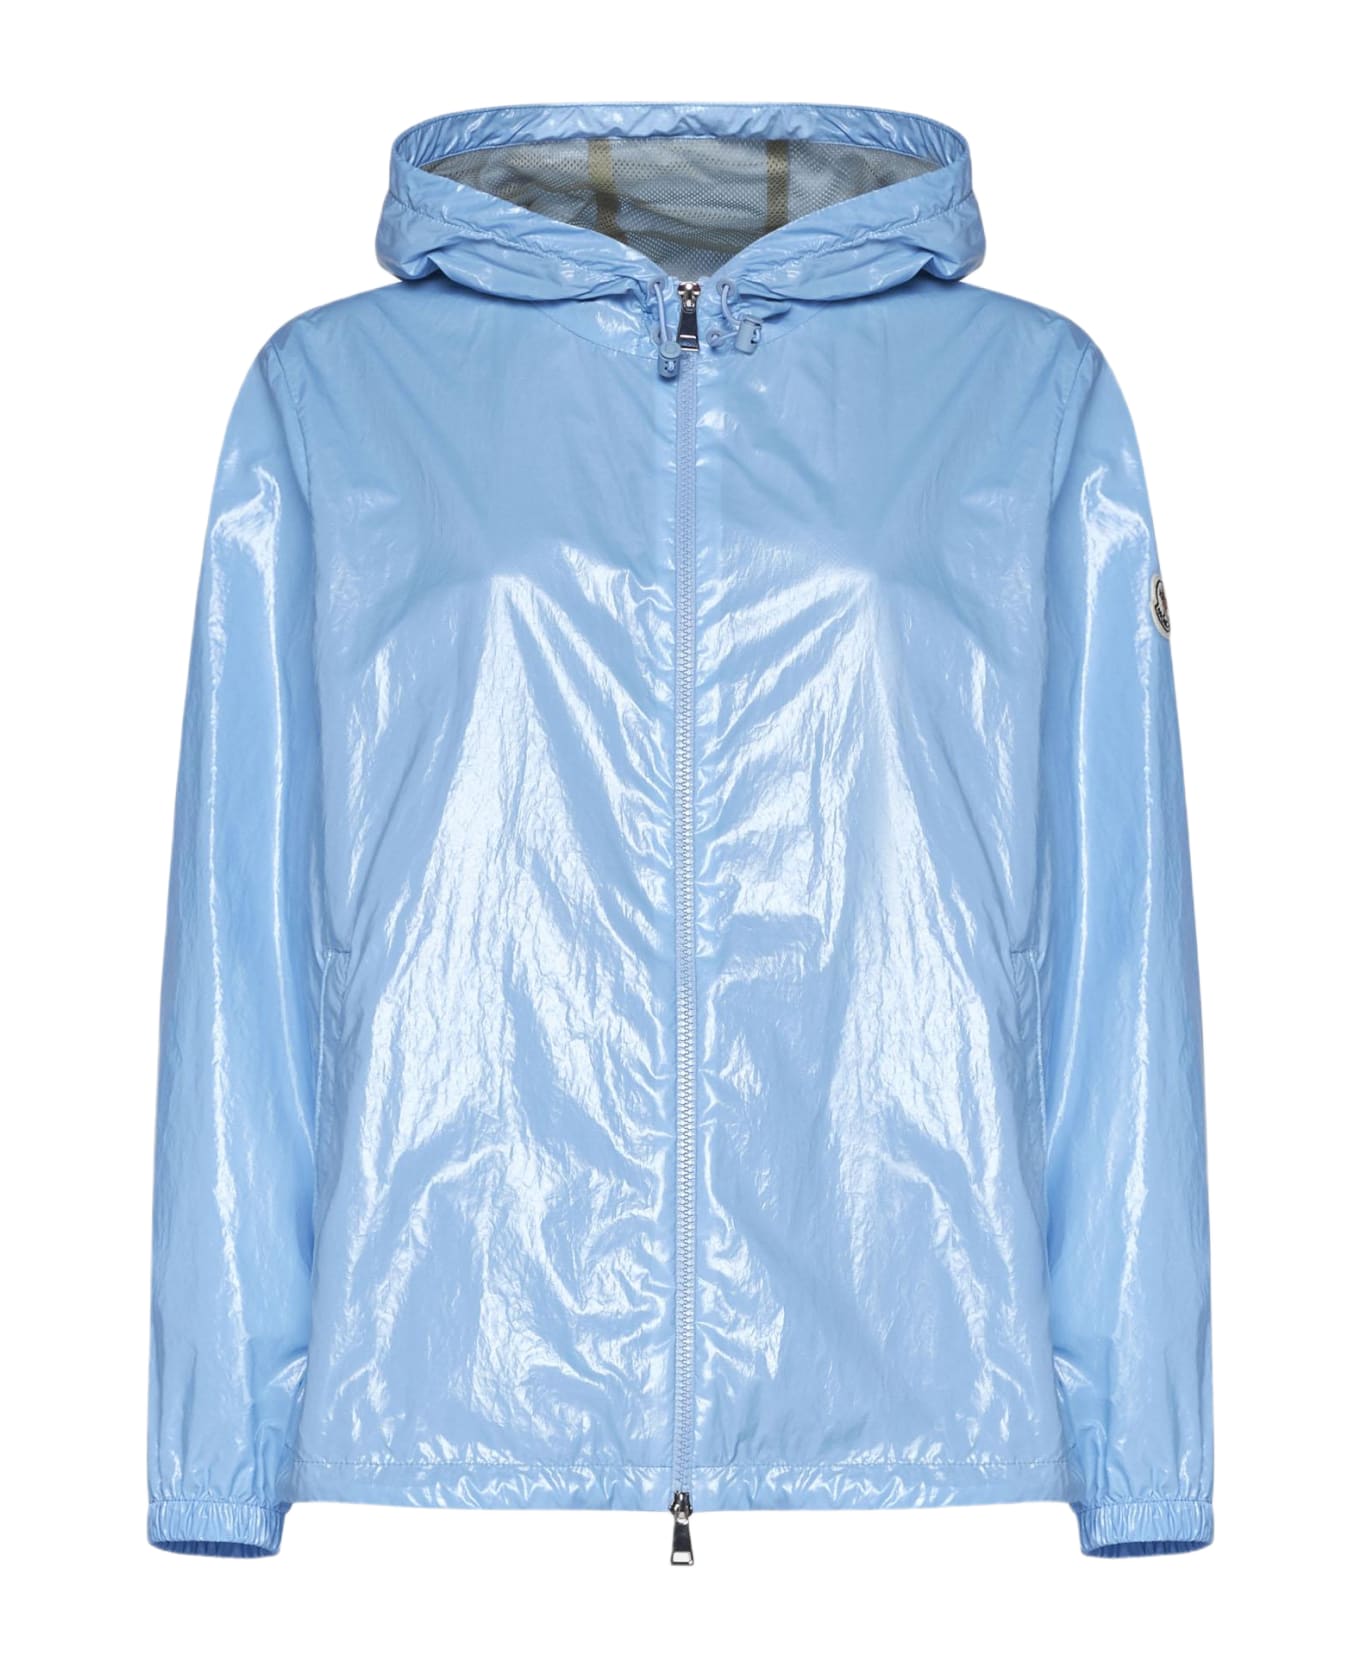 Moncler Wuisse Waxed Cotton Jacket - Clear Blue